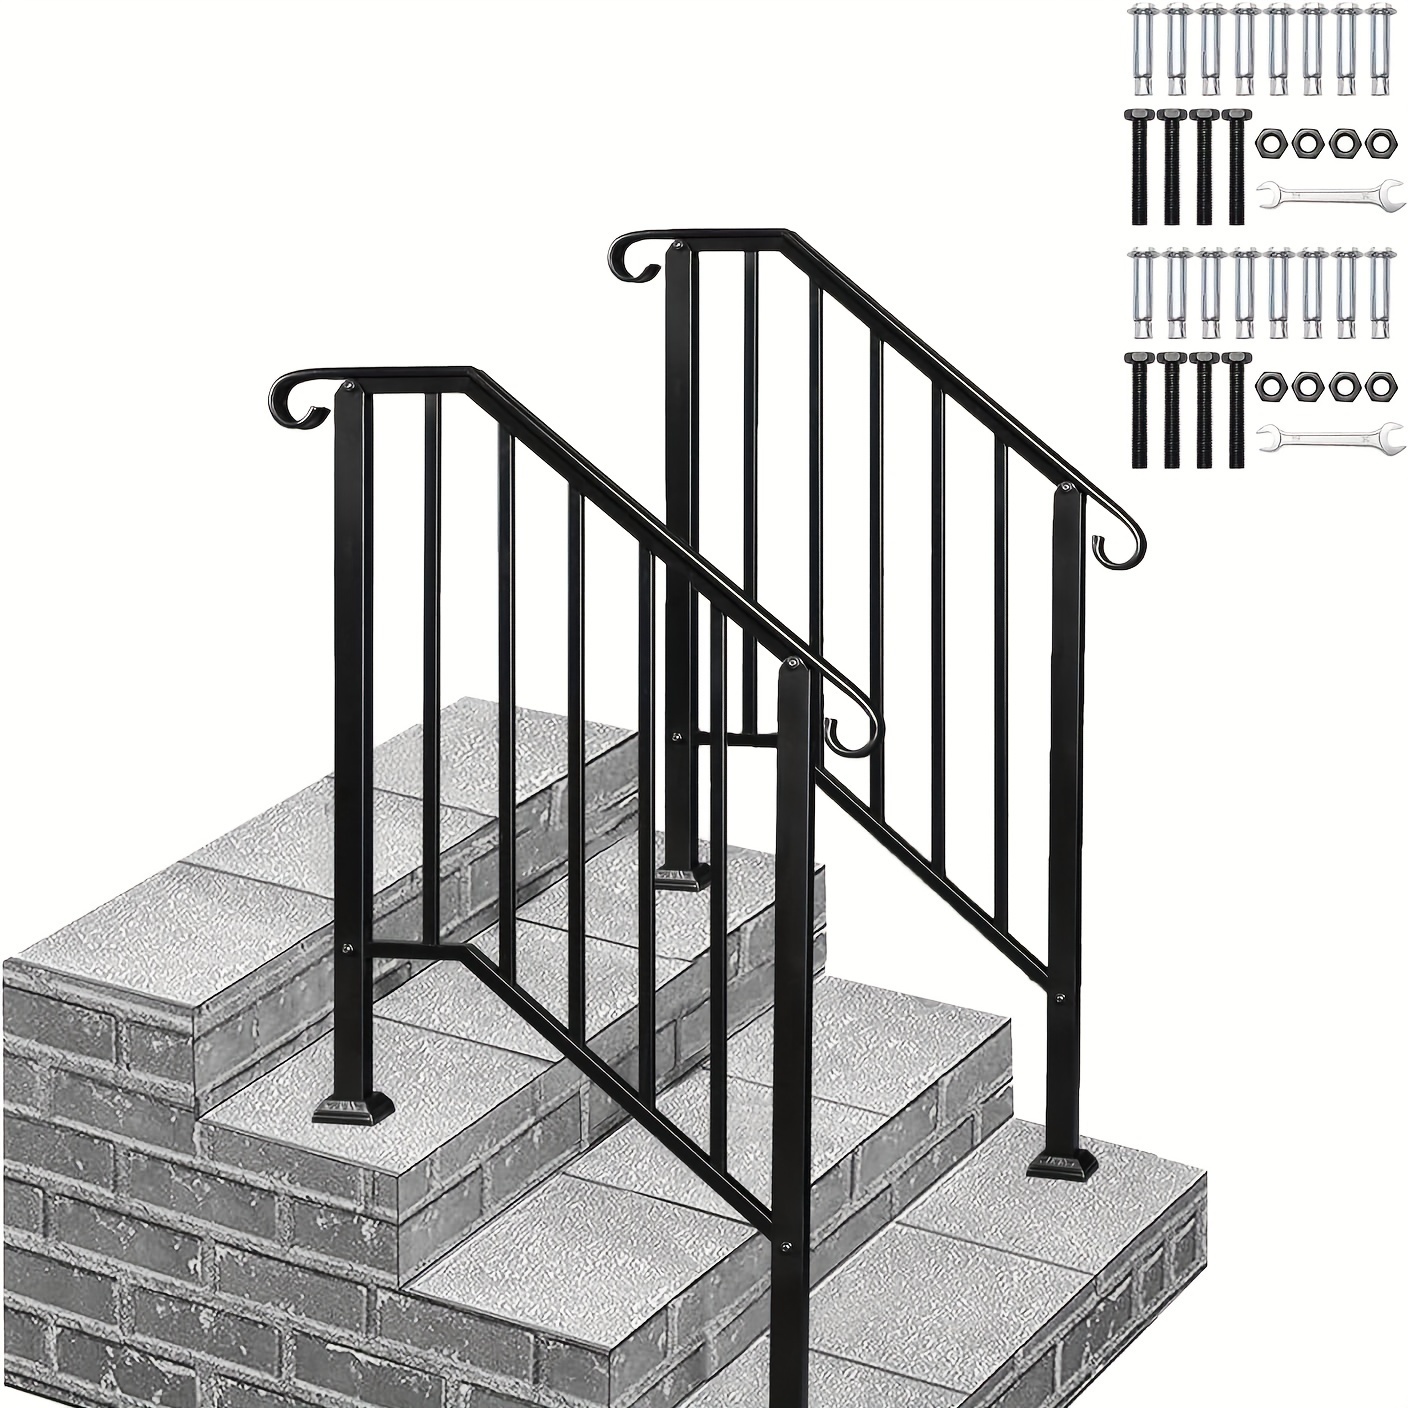 

Antsku 2 Pack 3 Step Handrails For Outdoor Steps, Wrought Iron Stair Railing Fits 2 Or 3 Steps, Metal Hand Rail, Staircase Handrails For Concrete, Porch, Deck, Exterior Steps, Black